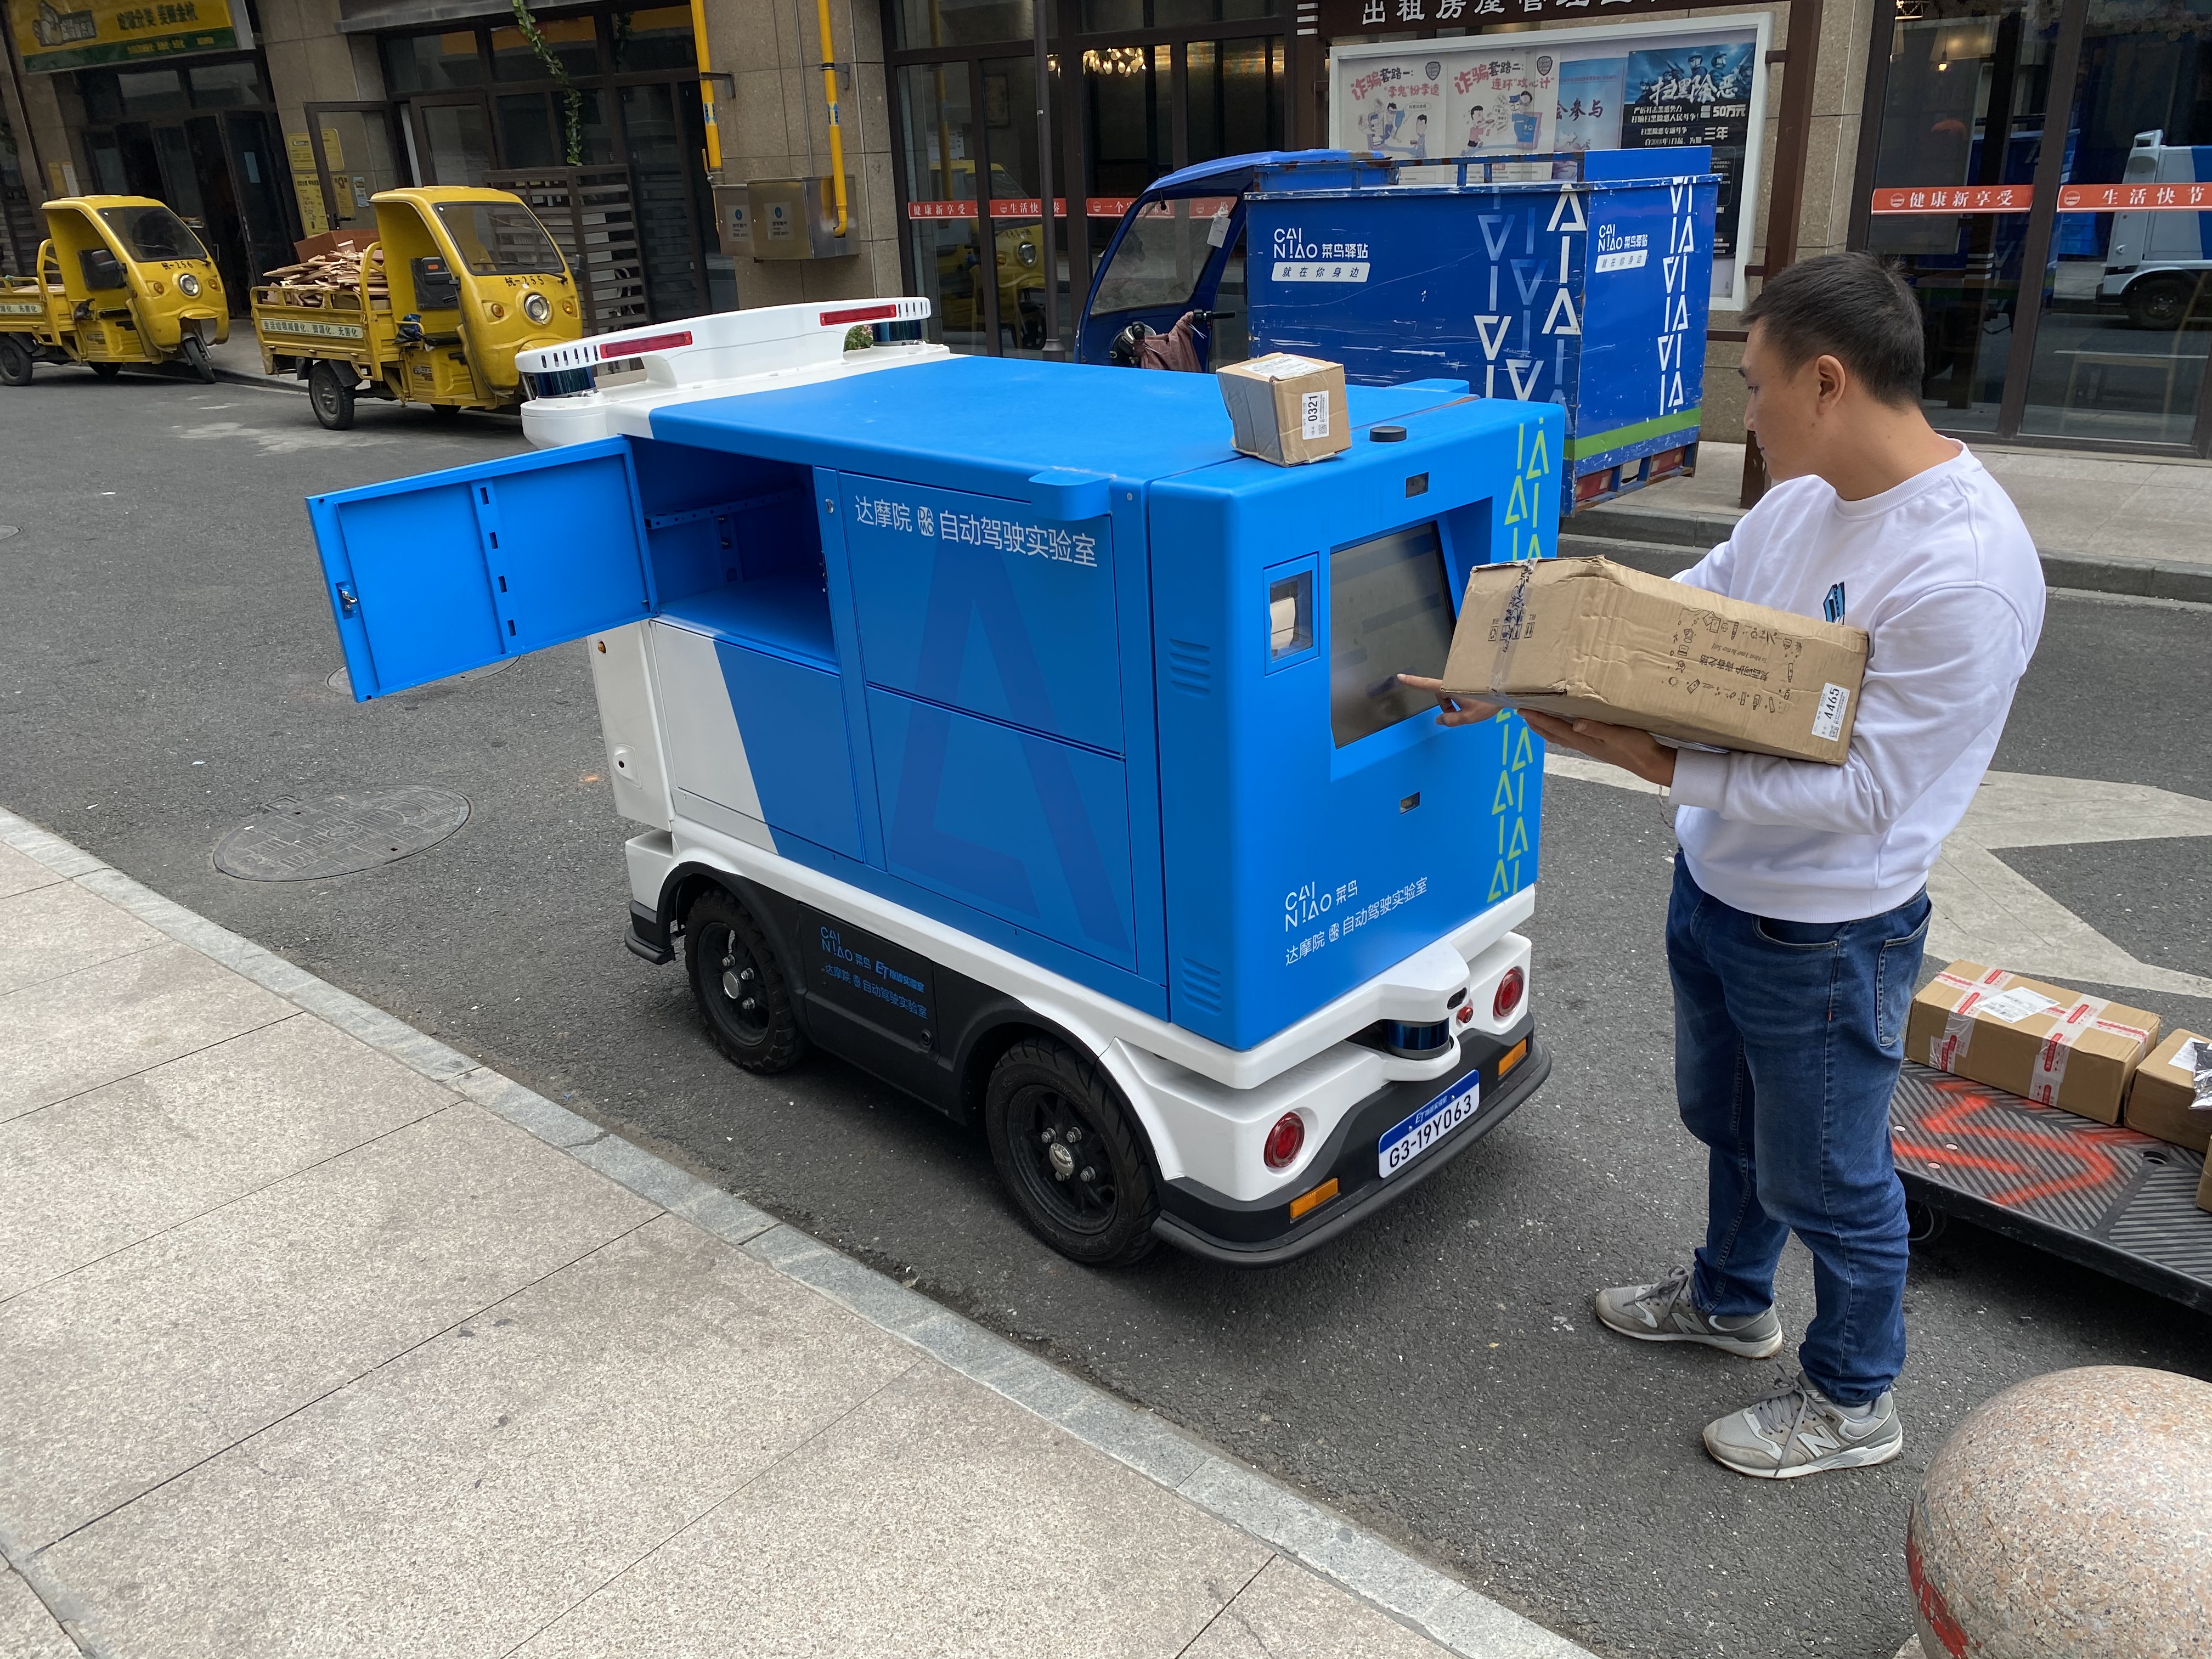 Cainiao engineer Long Fei loads packages onto the firm’s Xiao G automated delivery vehicle in Hangzhou, China on Oct. 19, 2020. (Charlie Campbell)